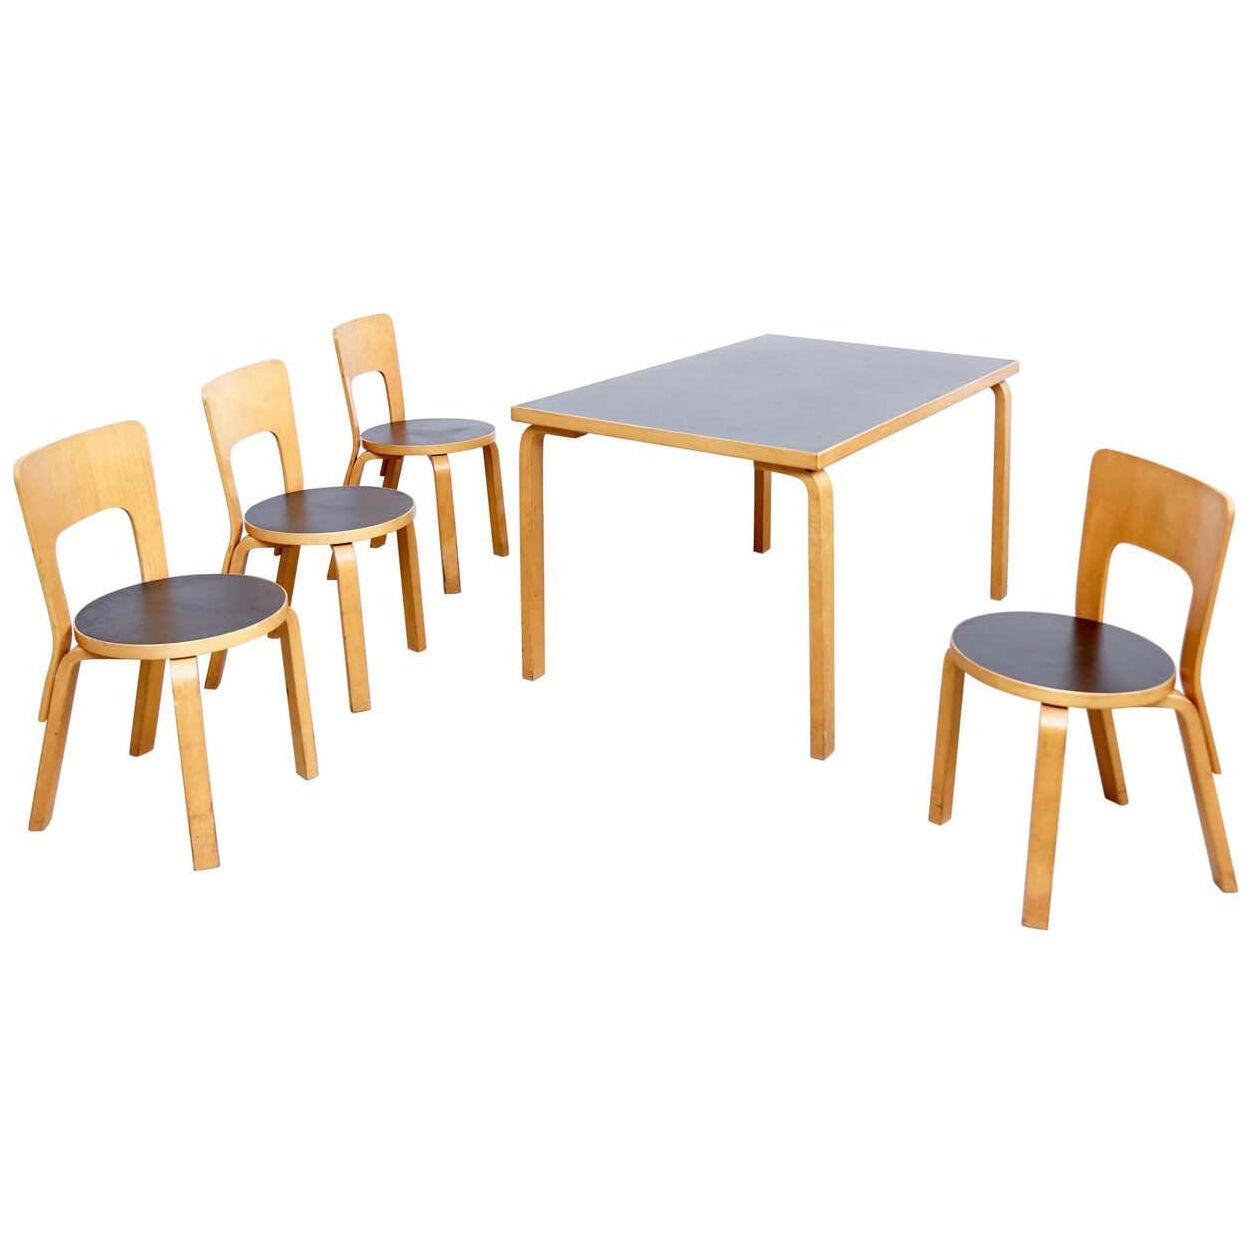 Alvar Aalto Dining Table and Four Chairs, circa 1970